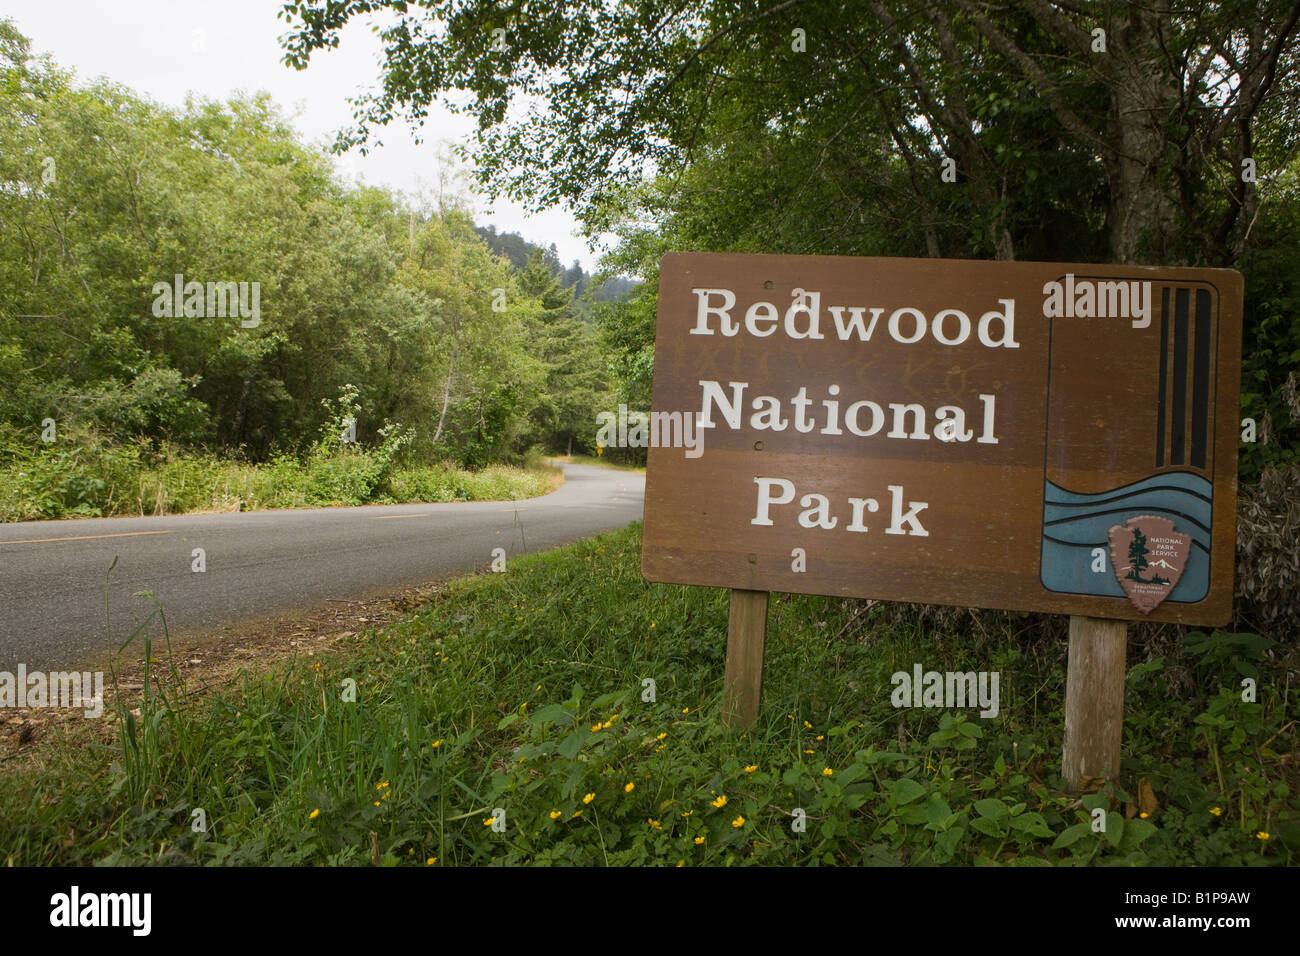 National Park Service welcome sign to Redwood National Park, California, USA. Stock Photo